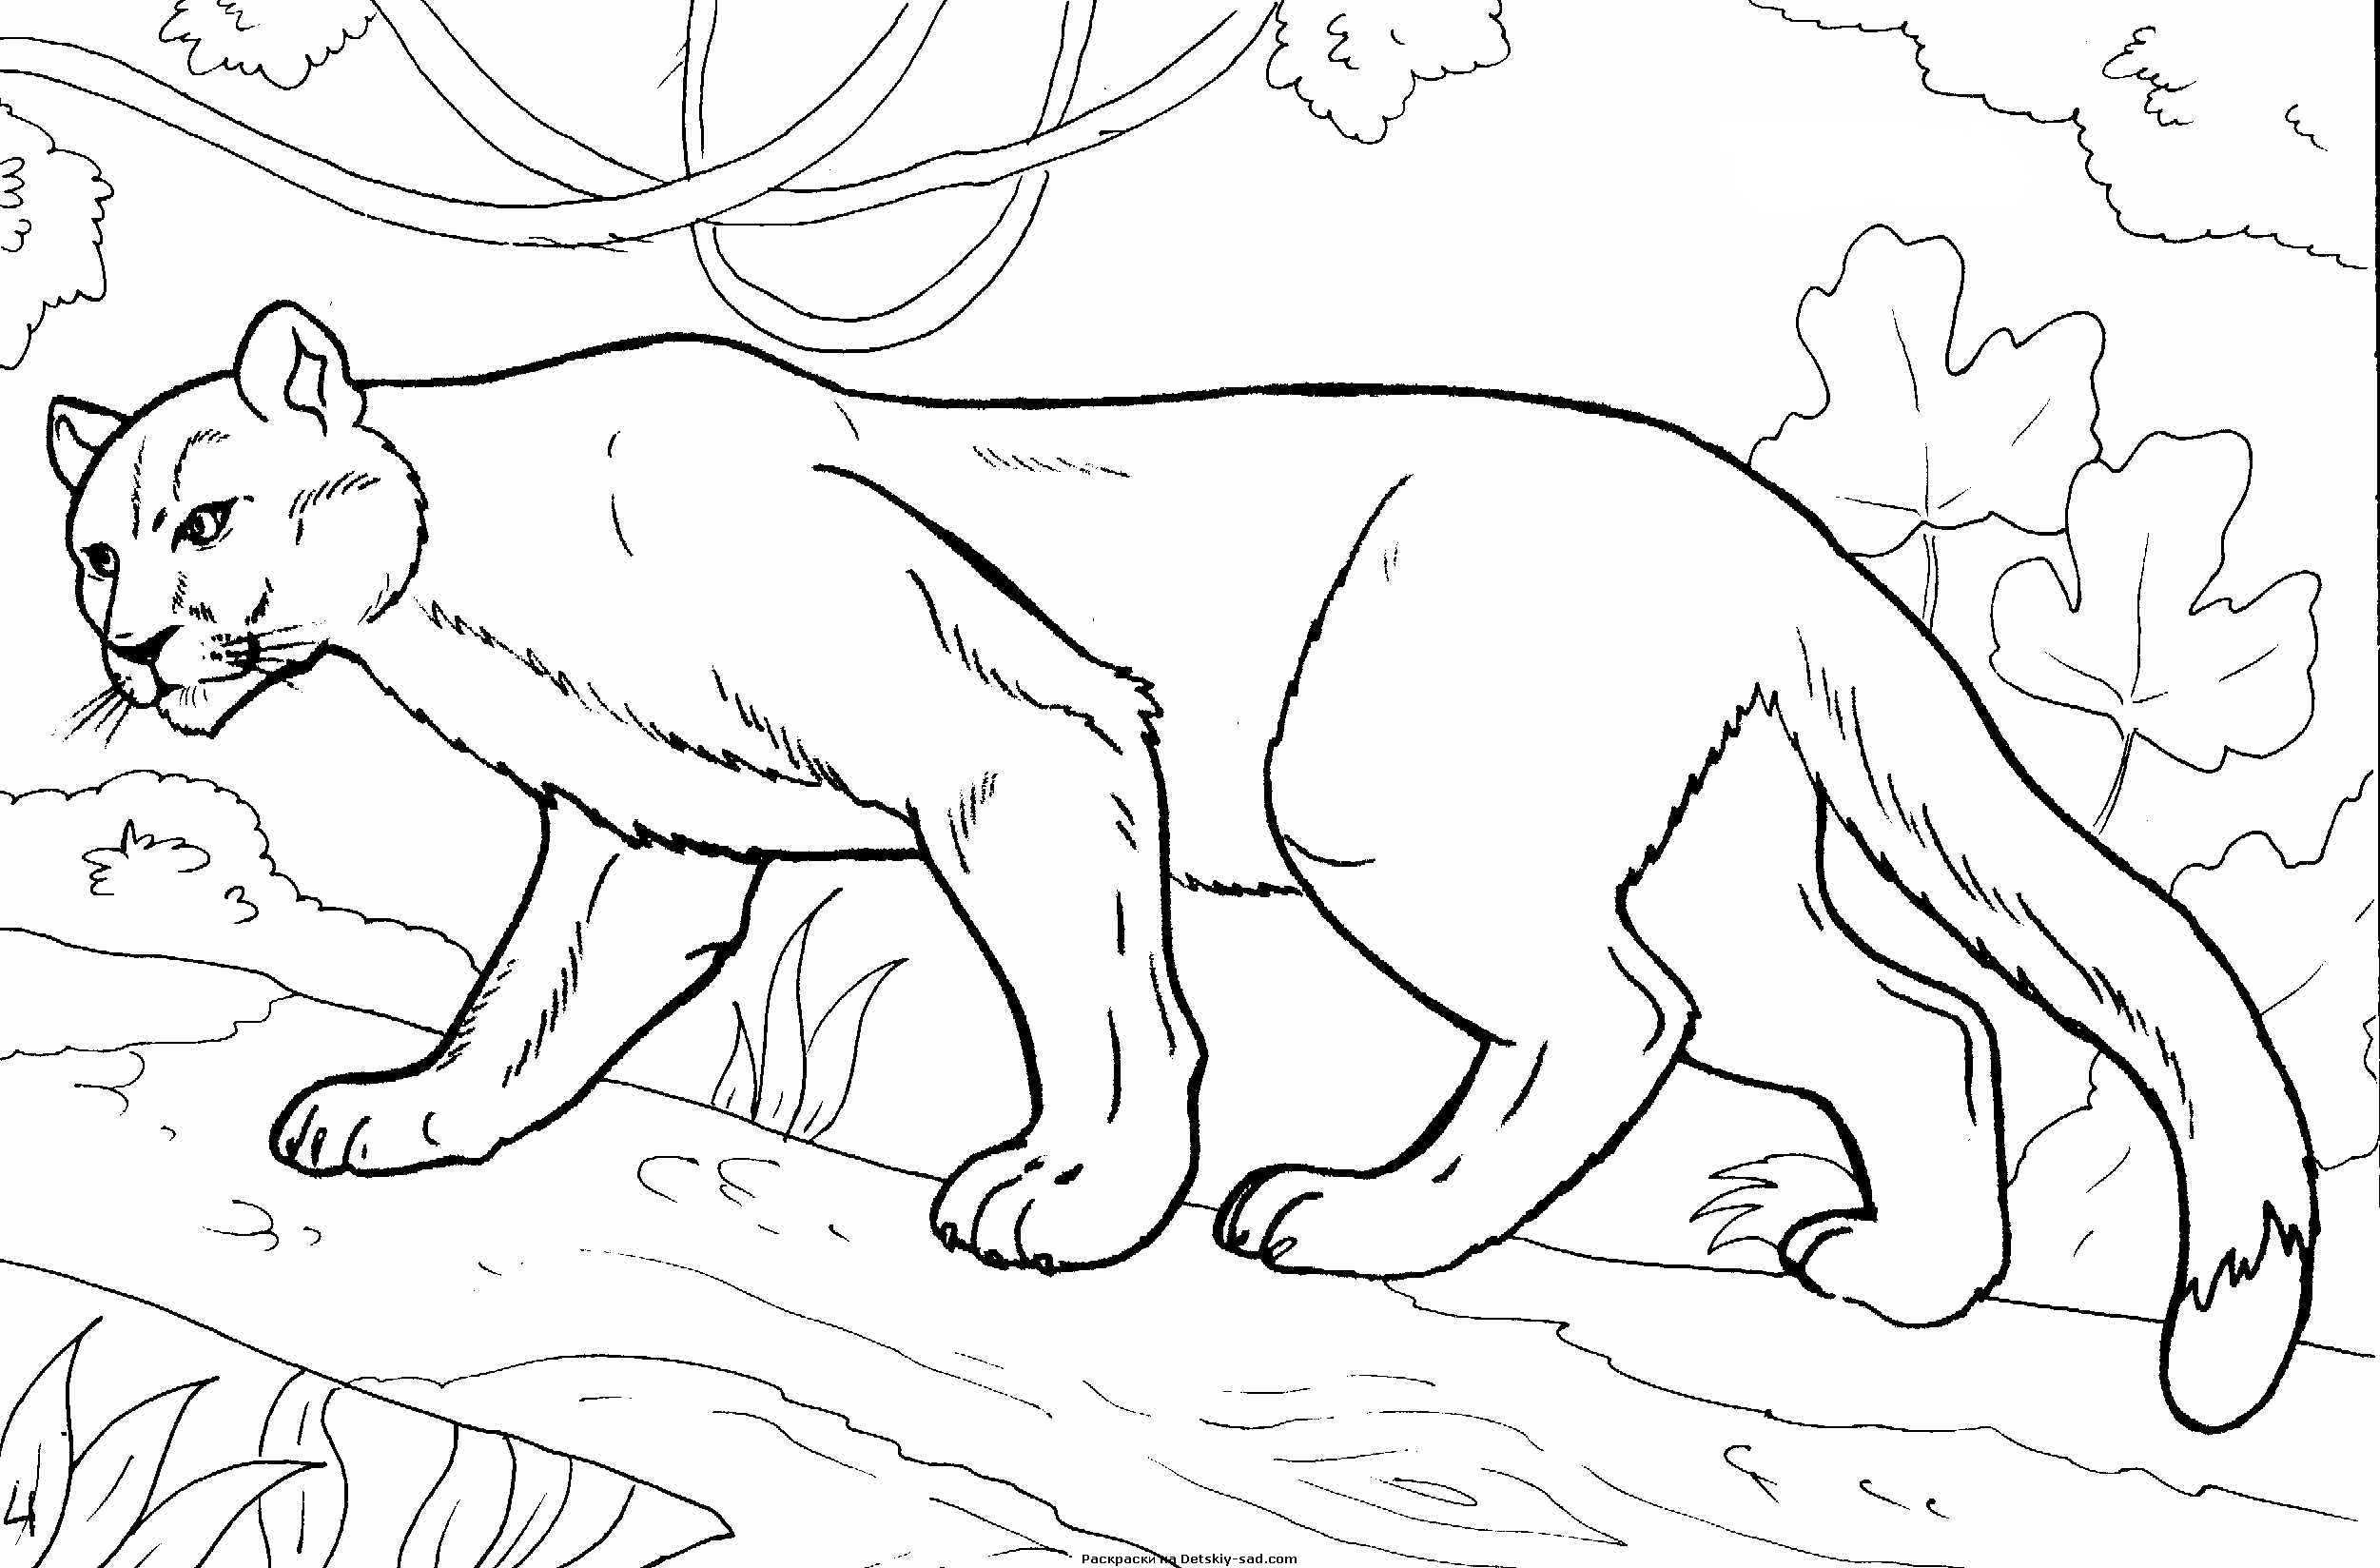 Puma coloring pages to download and print for free